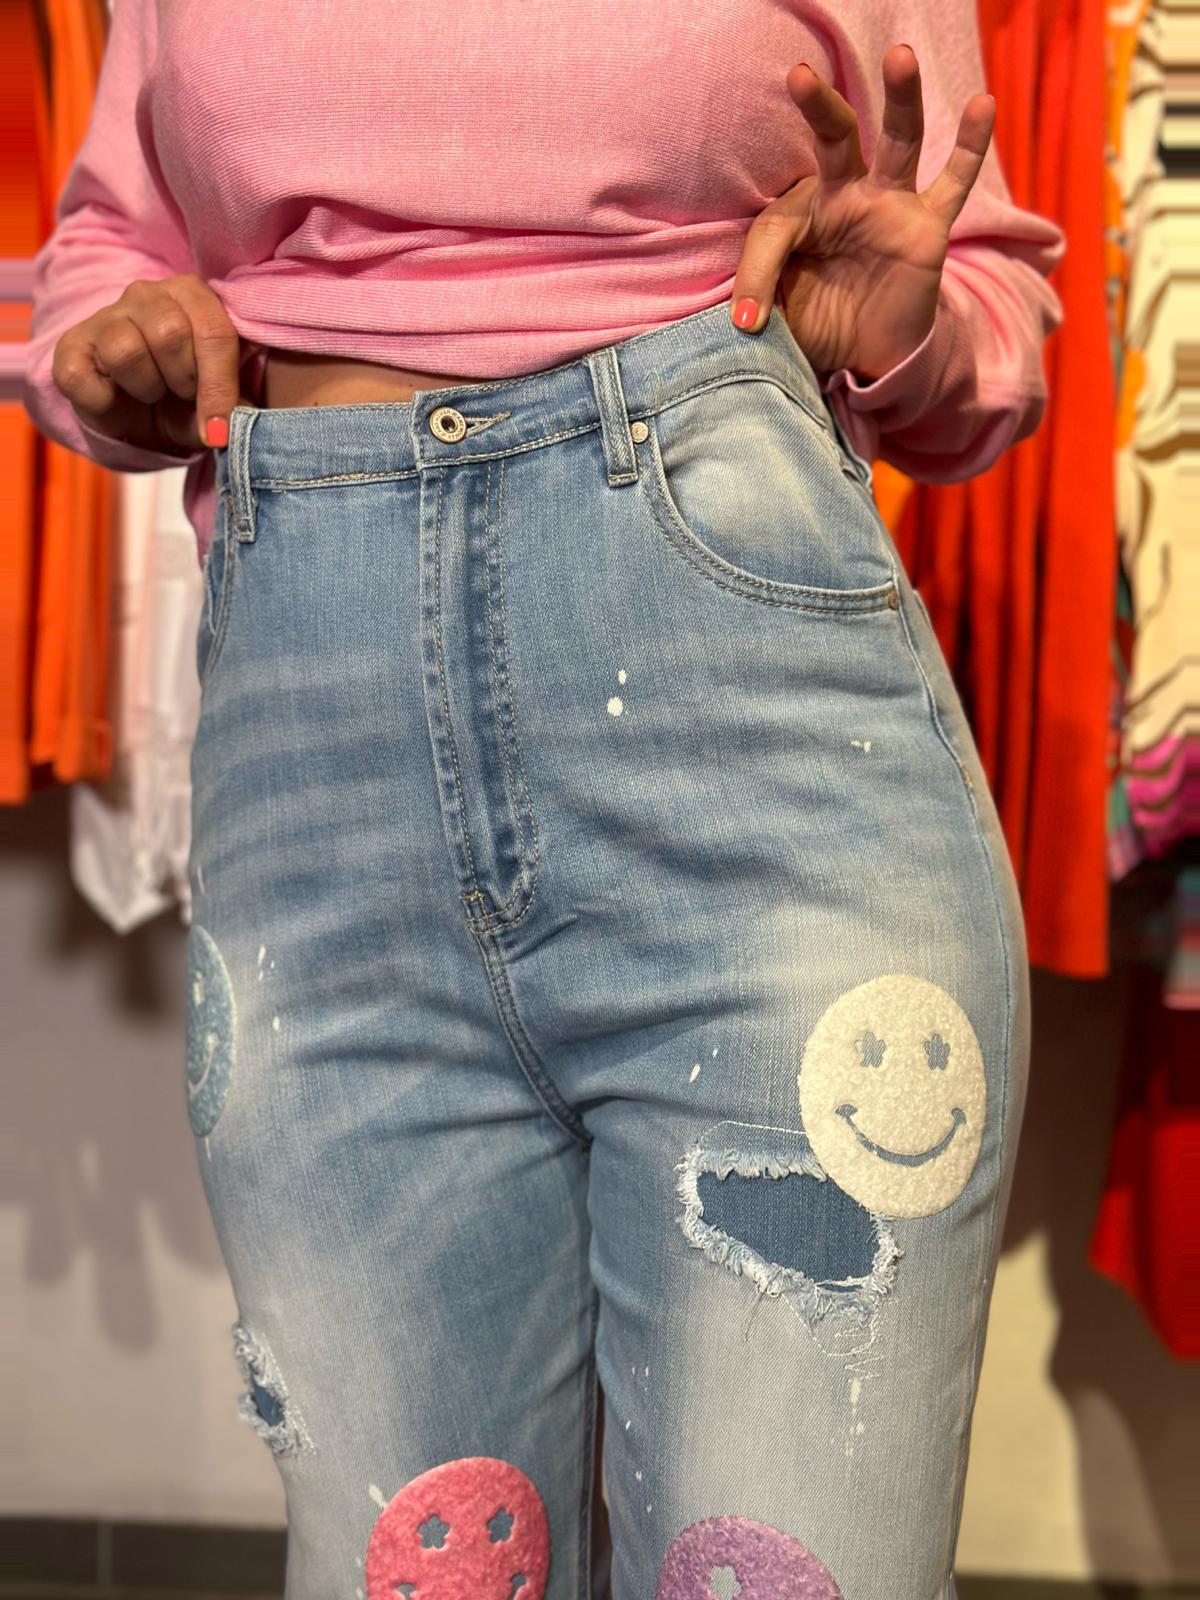 Mega nice "SMILEY" Jeans in "heller" Waschung